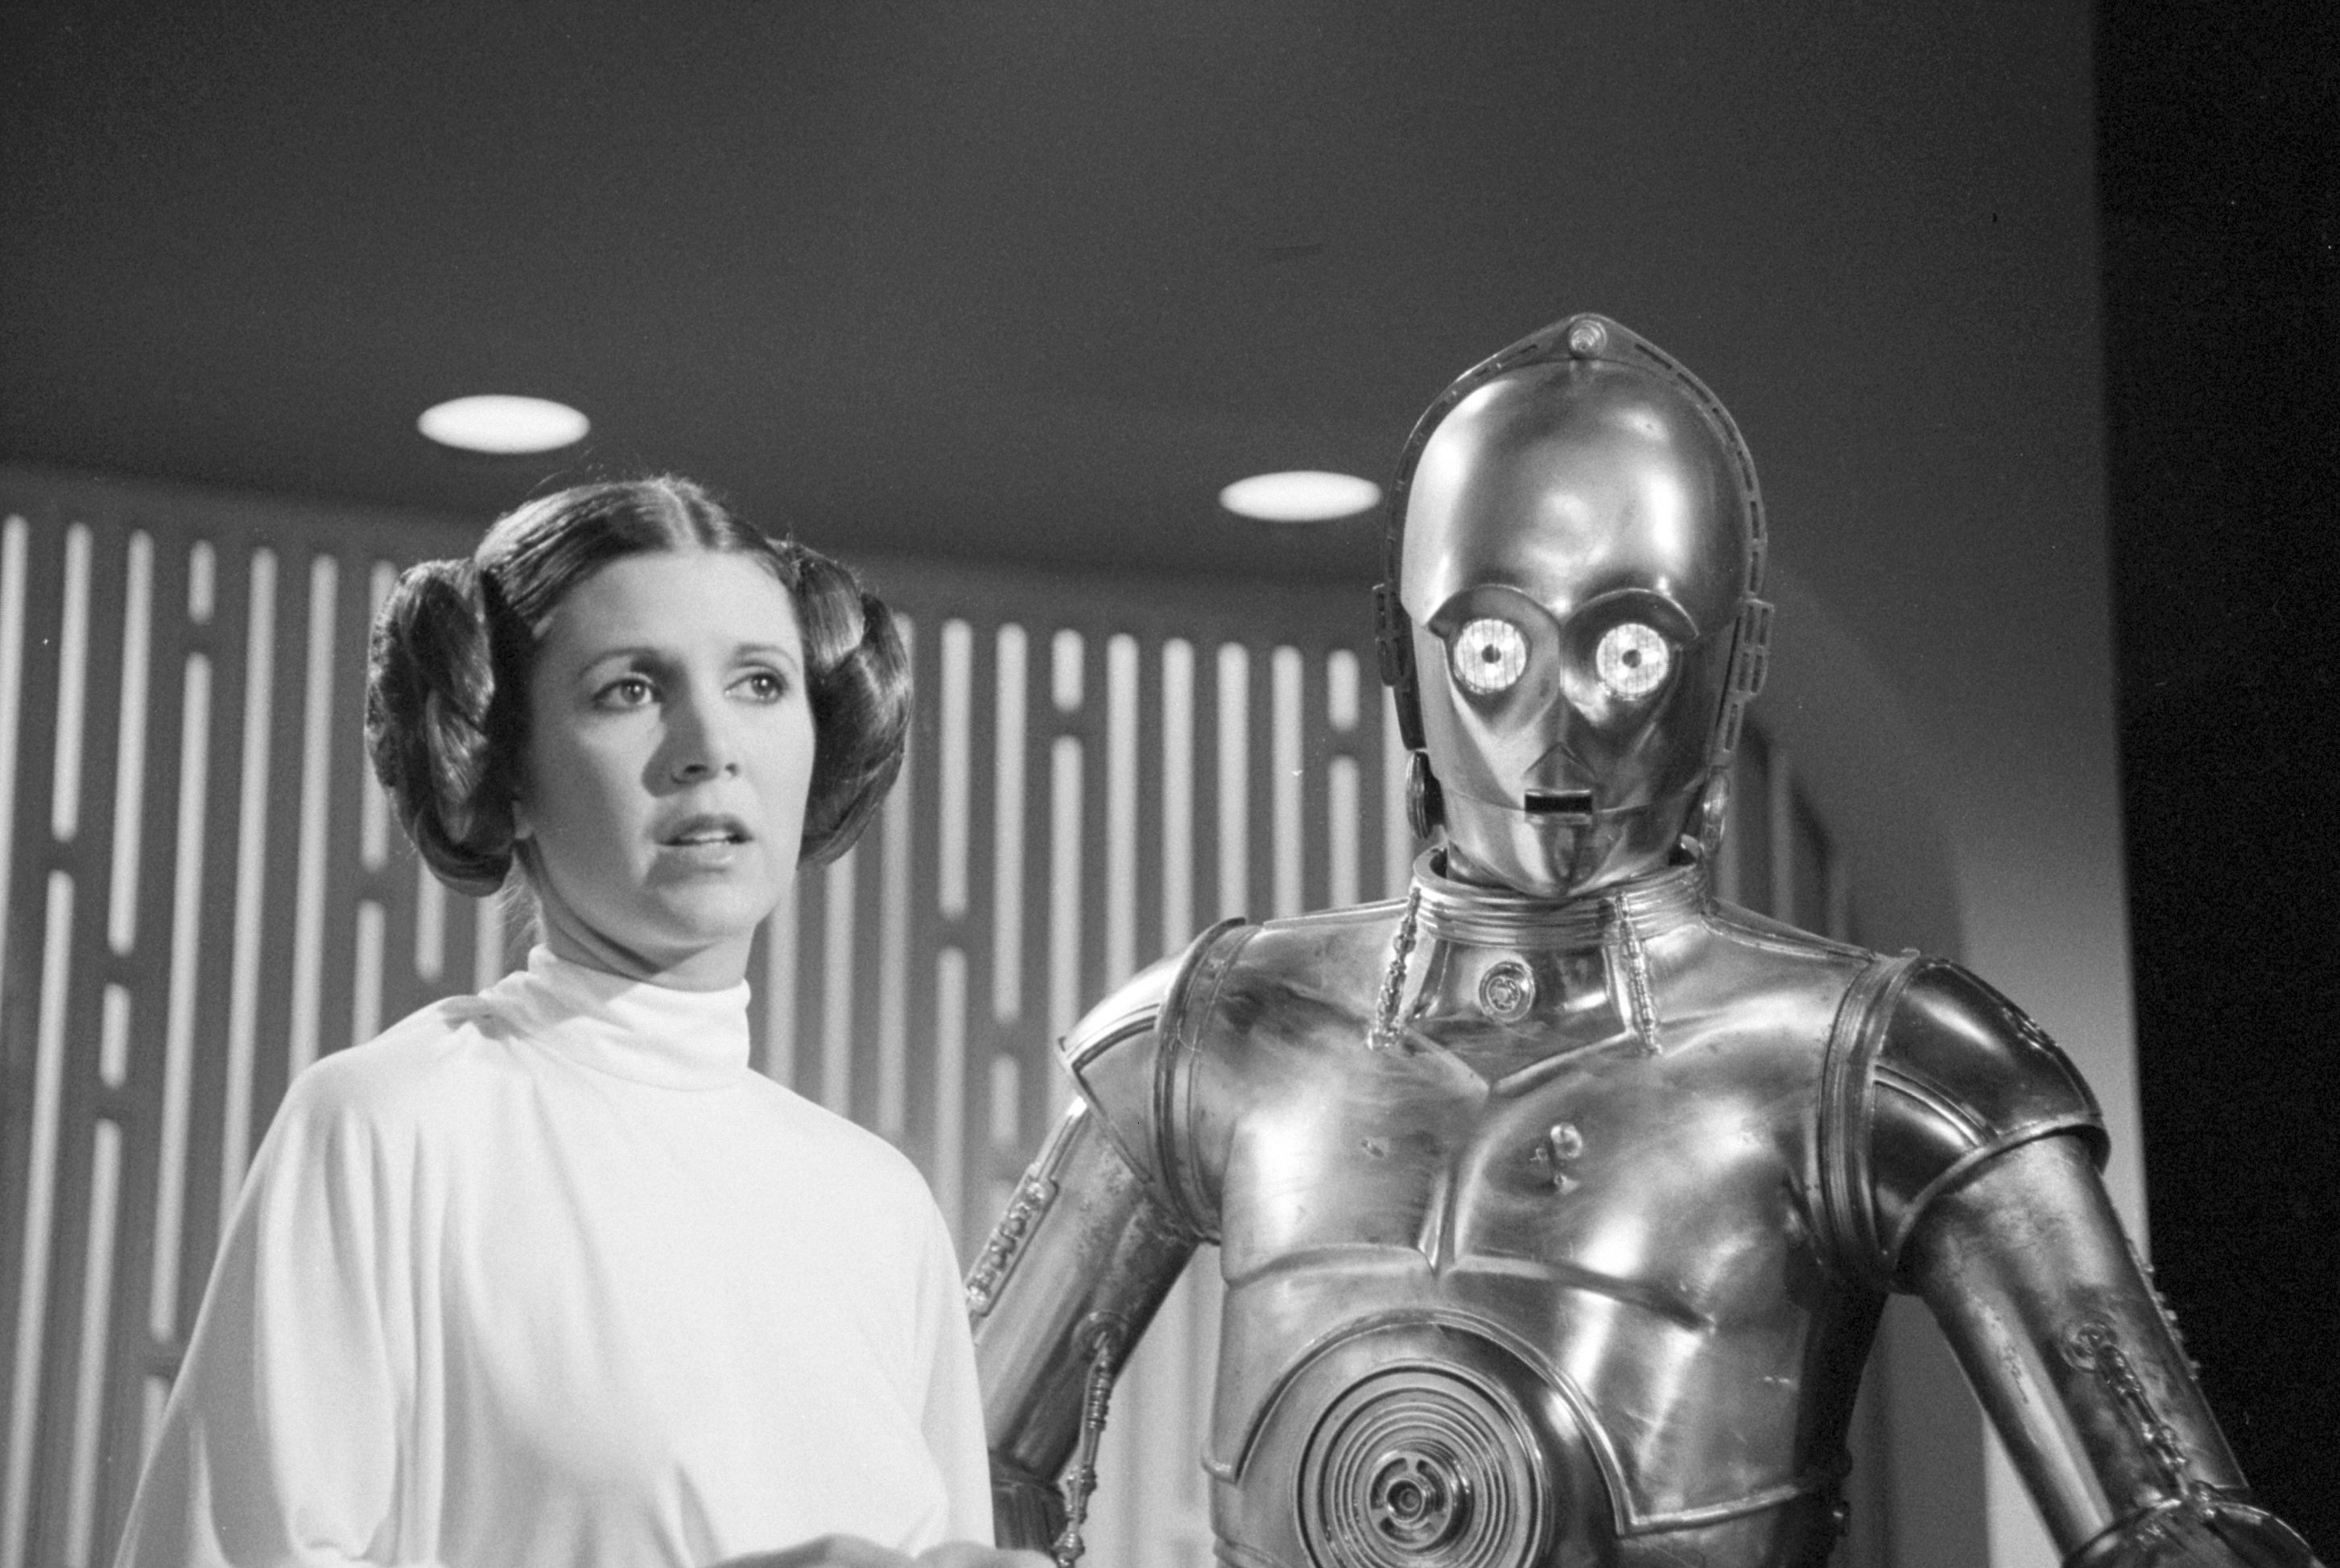 Carrie Fisher and C-3PO near lights